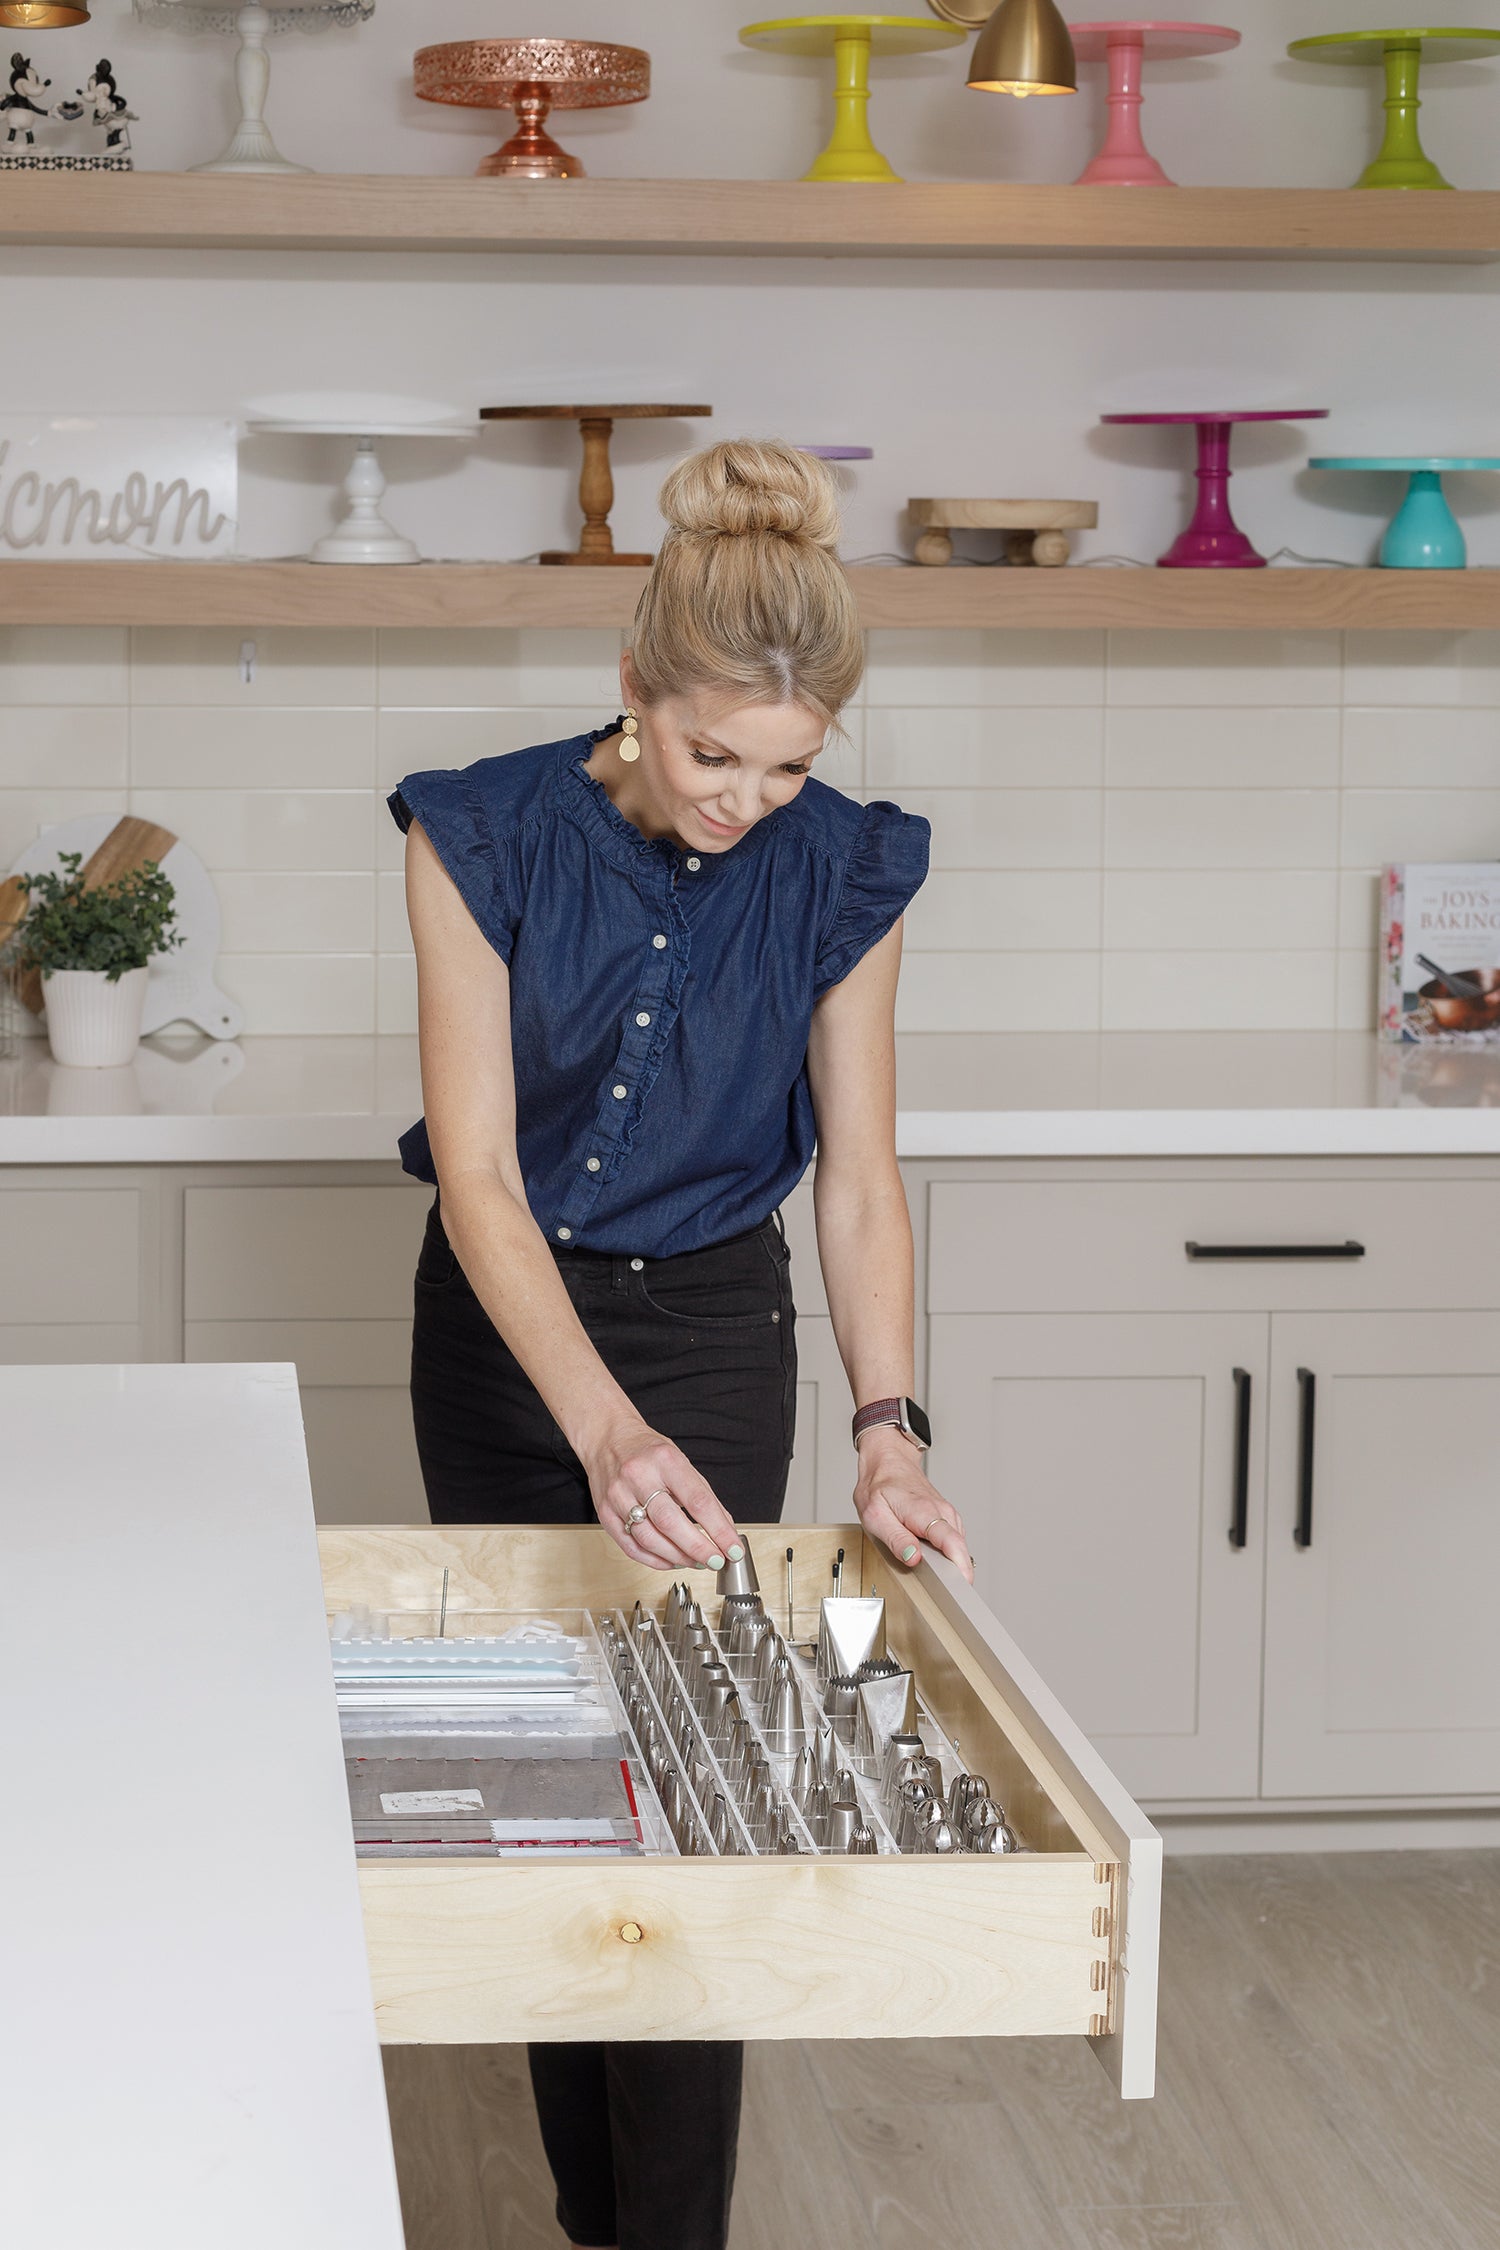 Amy selecting a piping tip from her custom-fit organizer in her kitchen drawer.